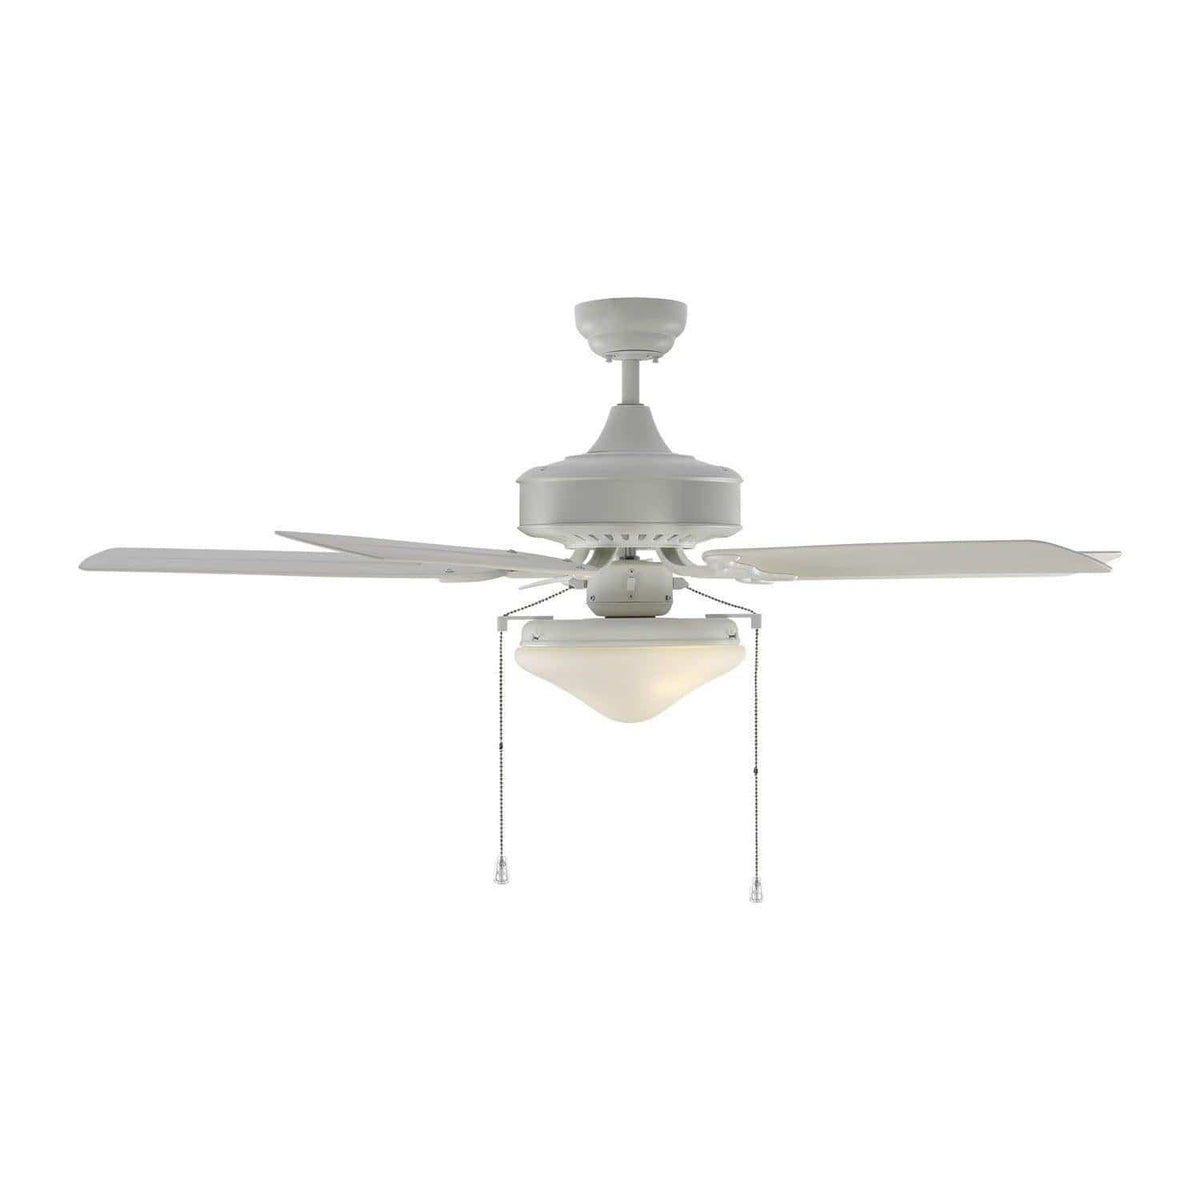 Visual Comfort Fan Collection - Haven Outdoor Ceiling Fan - 5HVO52RZWD | Montreal Lighting & Hardware